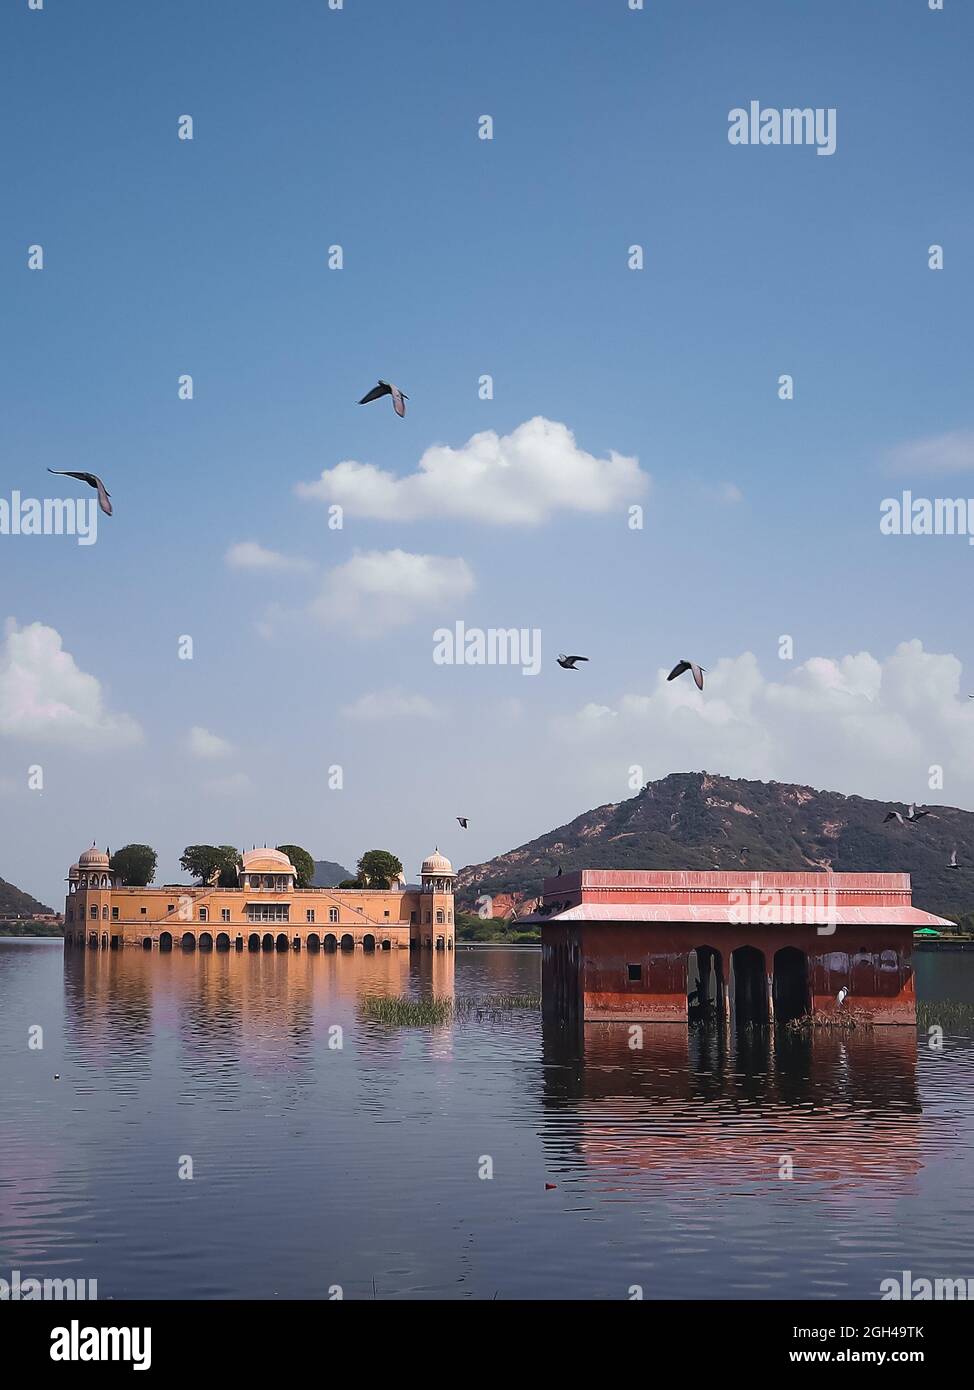 Jalmahal is a famous historical palace situated between the Mansagar lake of Jaipur, the capital of Rajasthan. Stock Photo